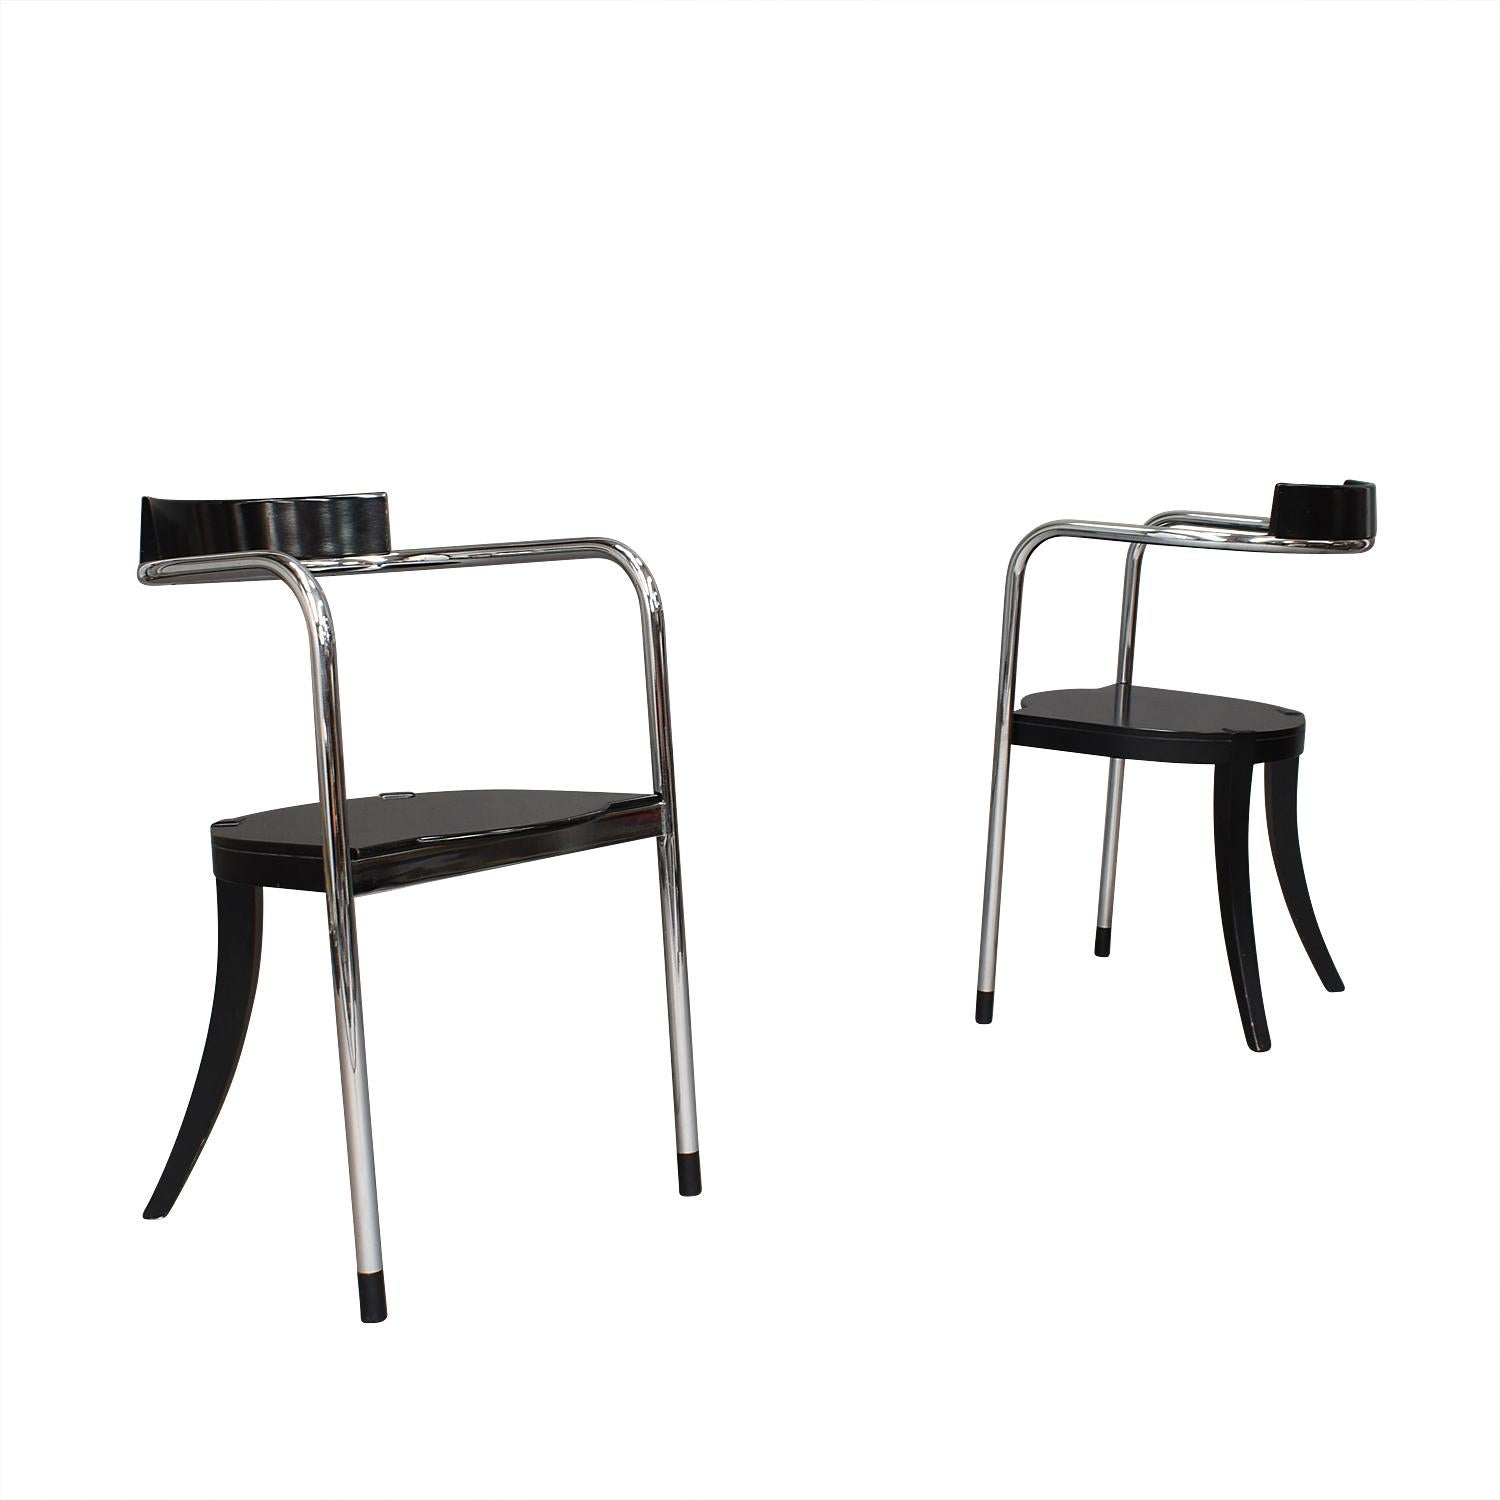 Artistic and stylish pair of side / dining chairs by David Palterer for Zanotta, Italy. The chairs are made in chromed tubular frame that features a floating backrest. The wood is made in the manor of original ebonized wood.

Designer: David